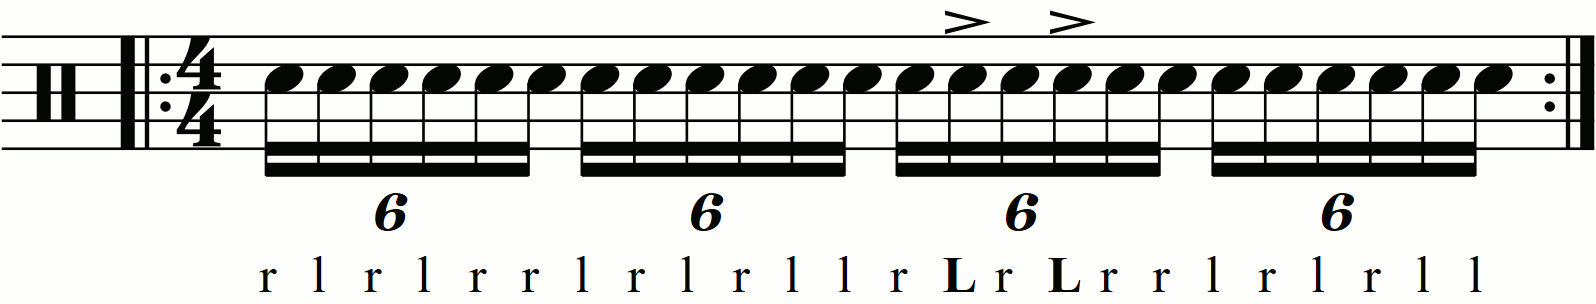 Accenting left hands in a double paradiddle